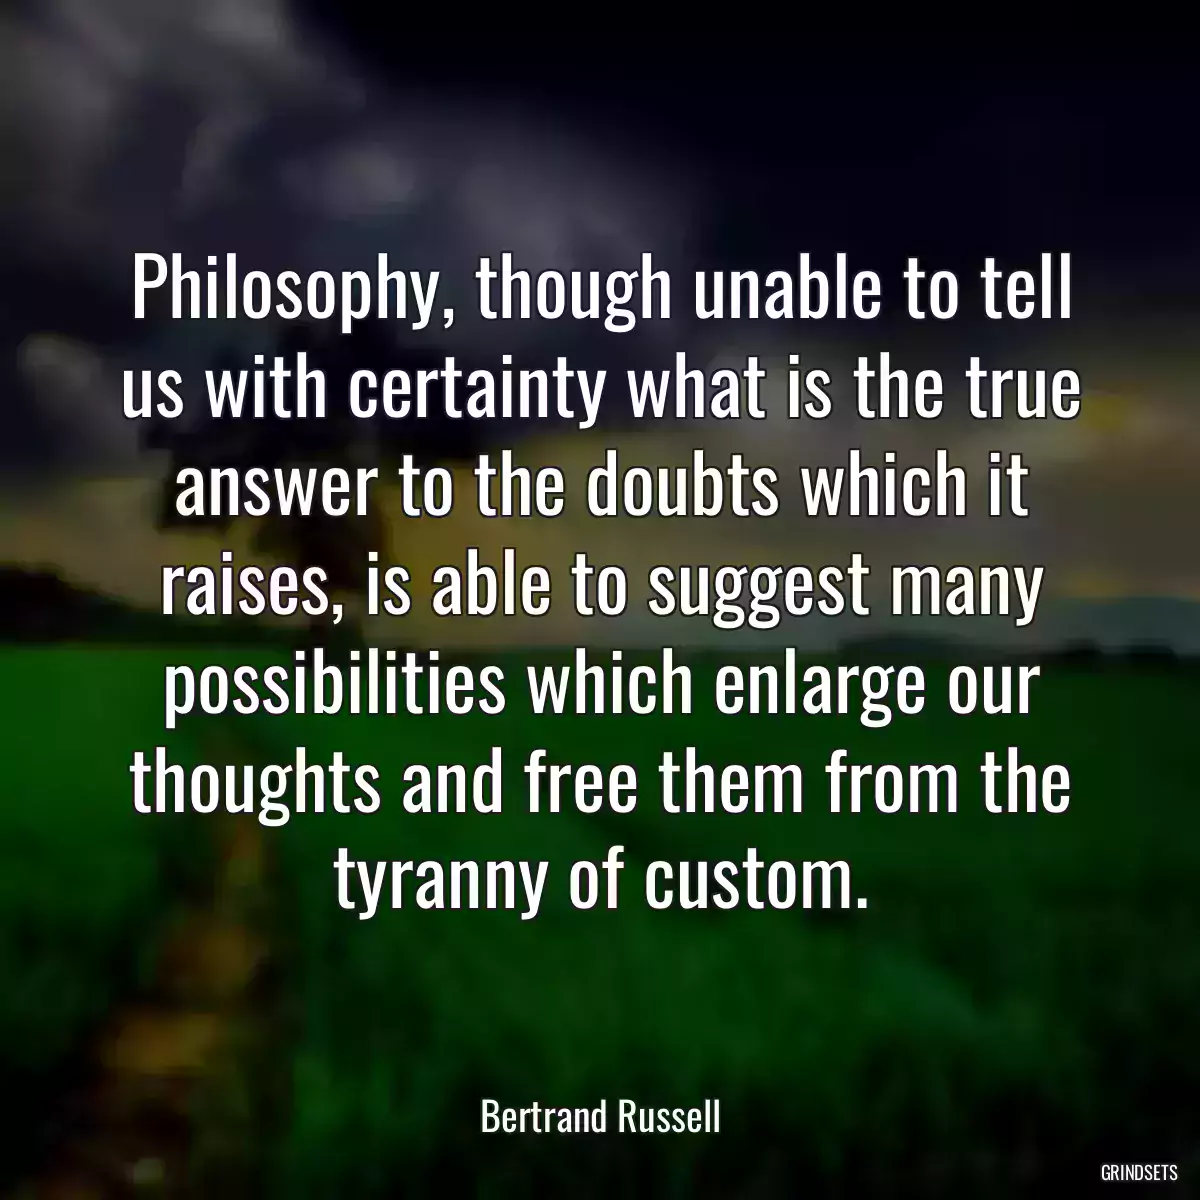 Philosophy, though unable to tell us with certainty what is the true answer to the doubts which it raises, is able to suggest many possibilities which enlarge our thoughts and free them from the tyranny of custom.